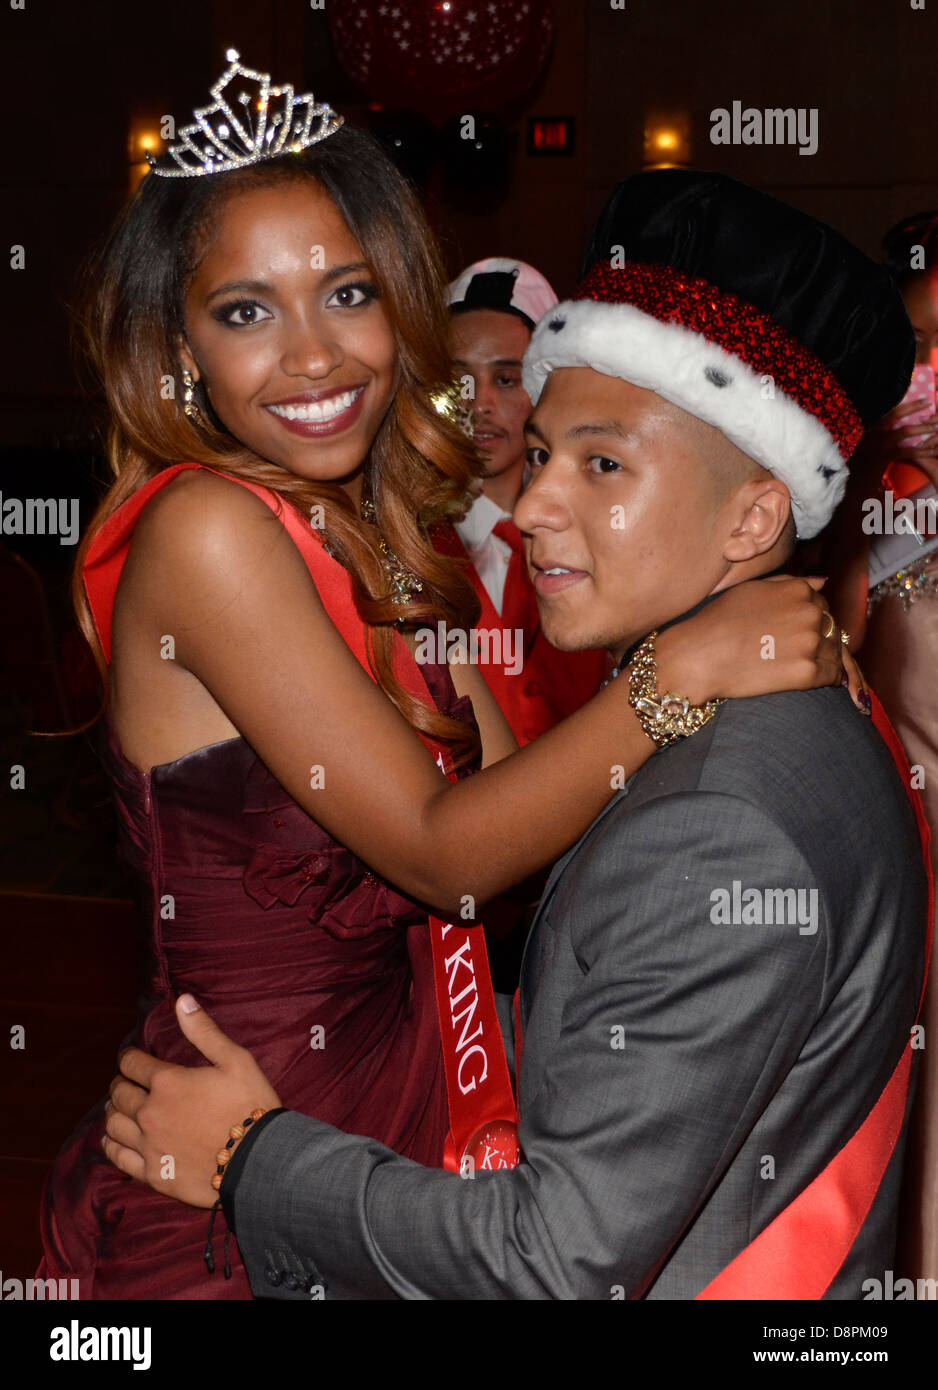 A king and queen at the high school prom dance together Stock Photo